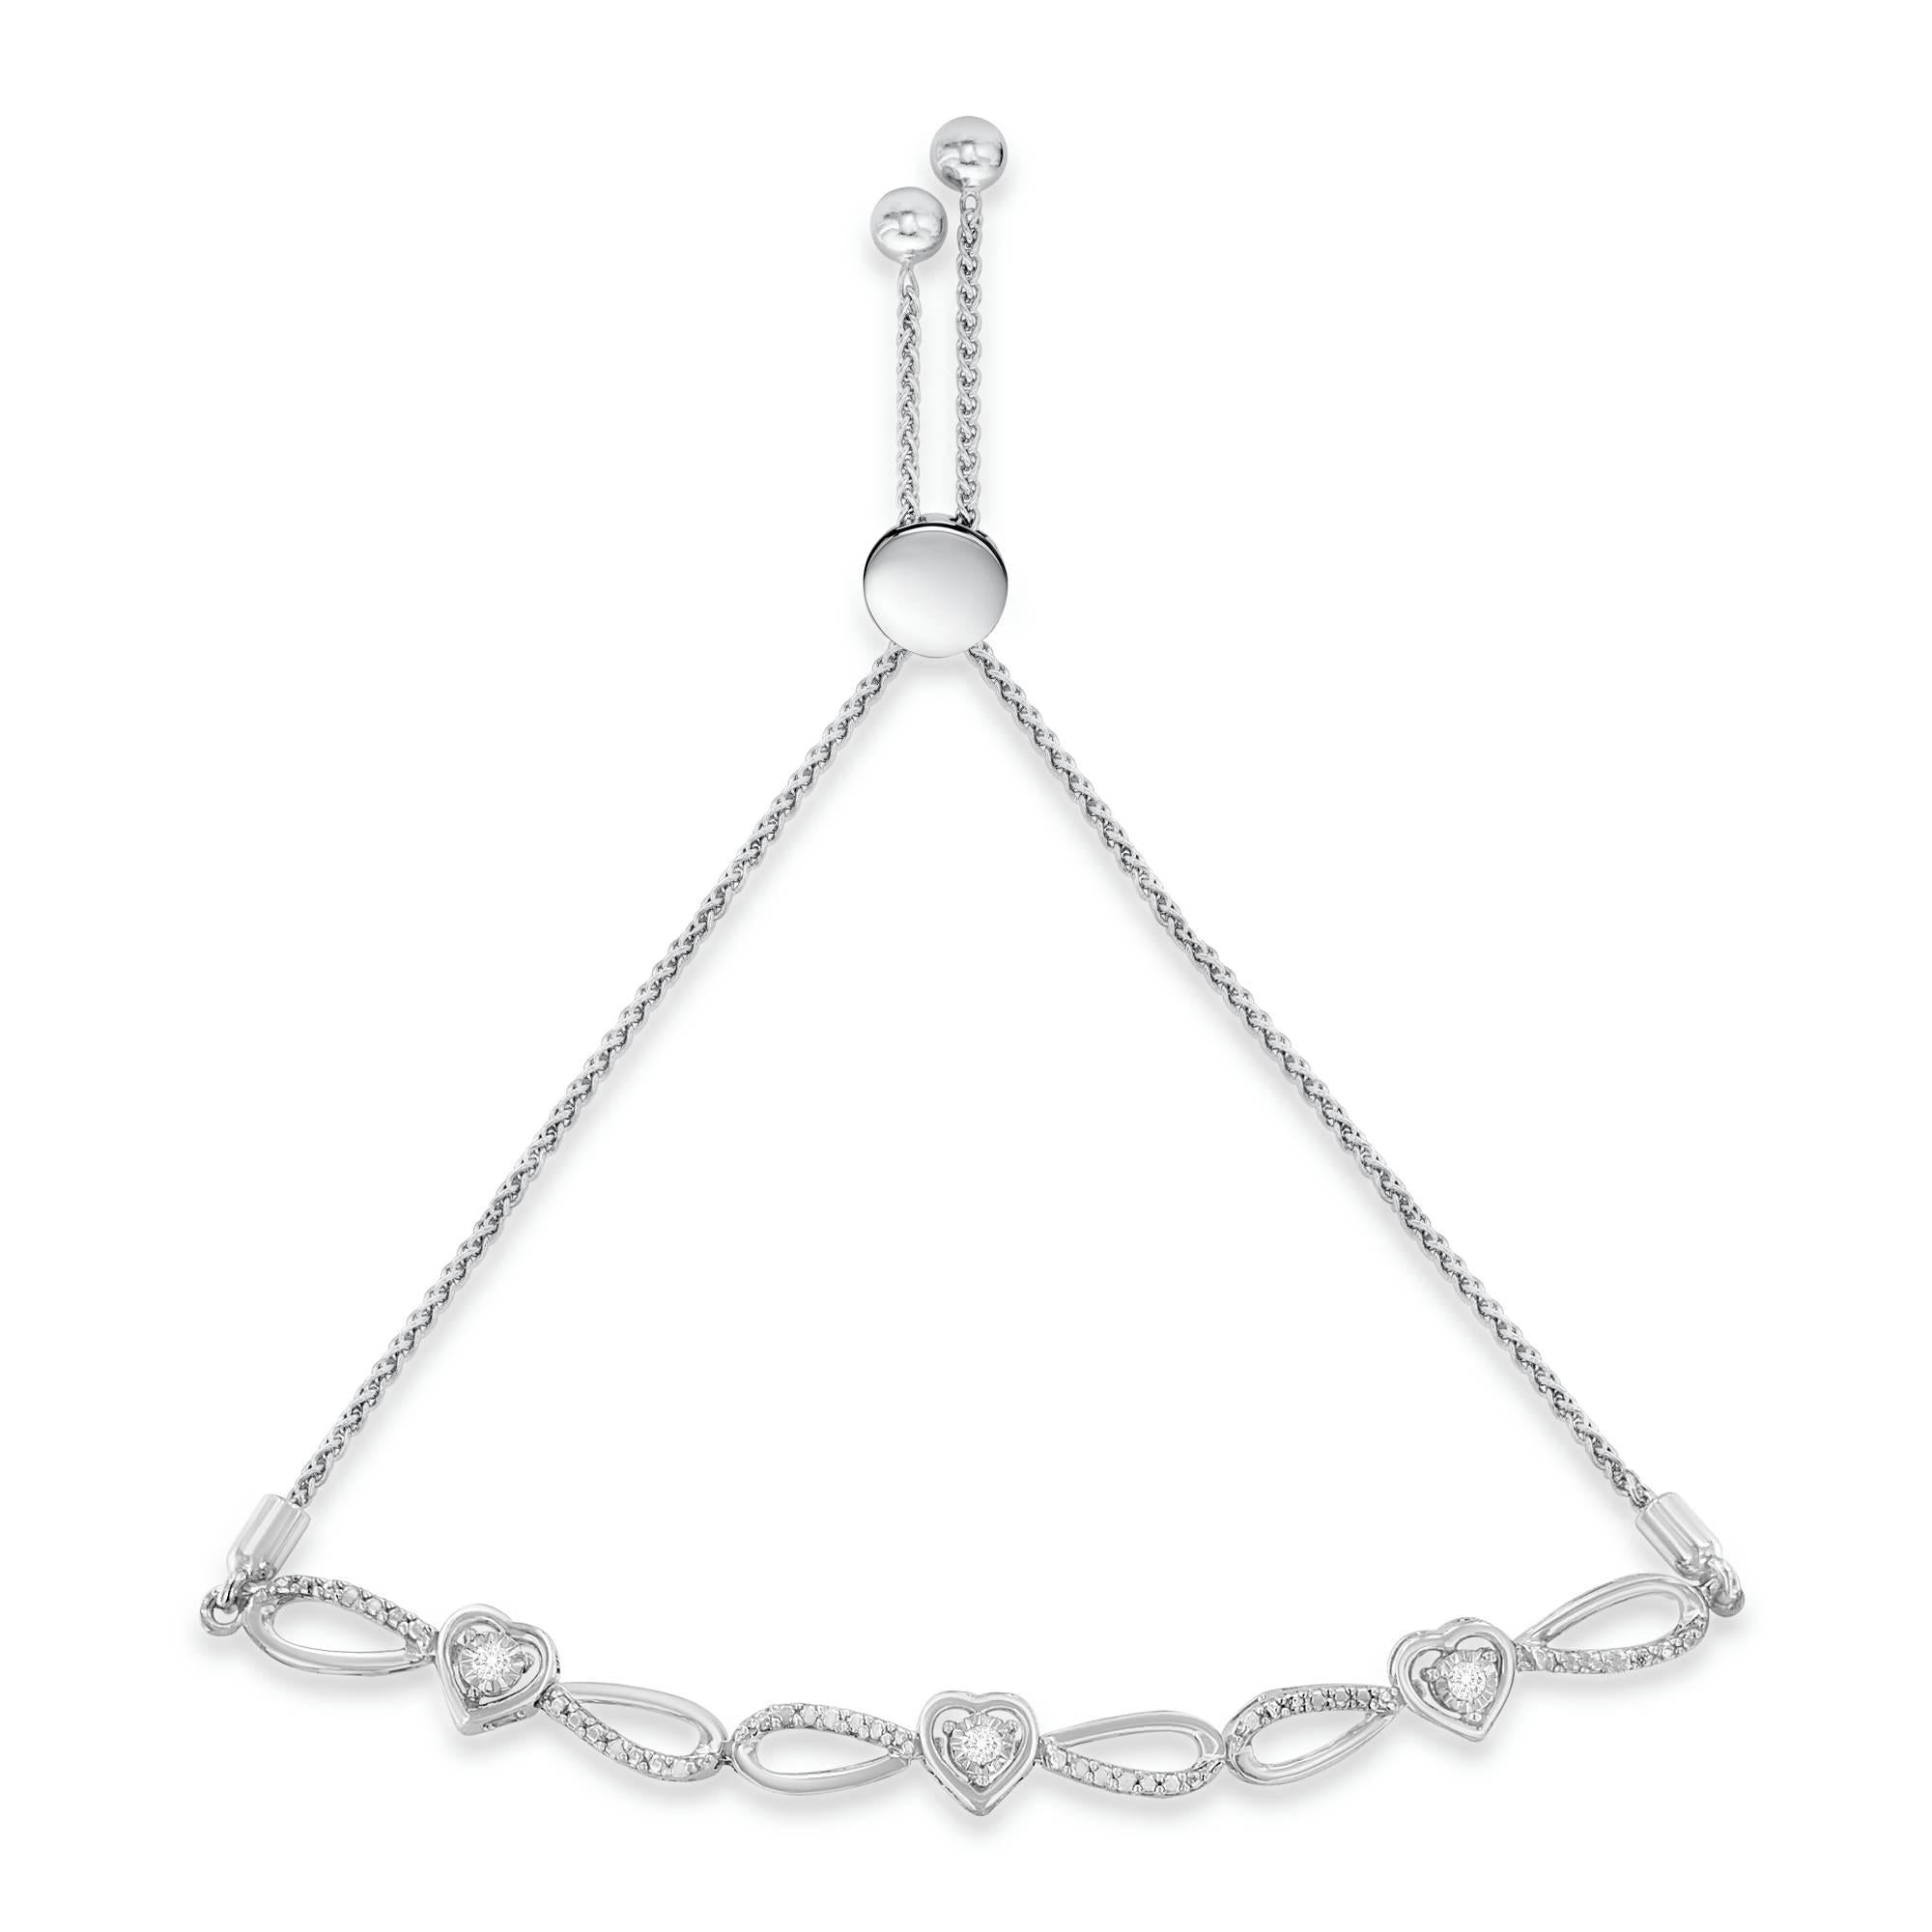 Elevate Your Love with our .925 Sterling Silver Diamond Accent Heart and Infinity Bolo Bracelet!